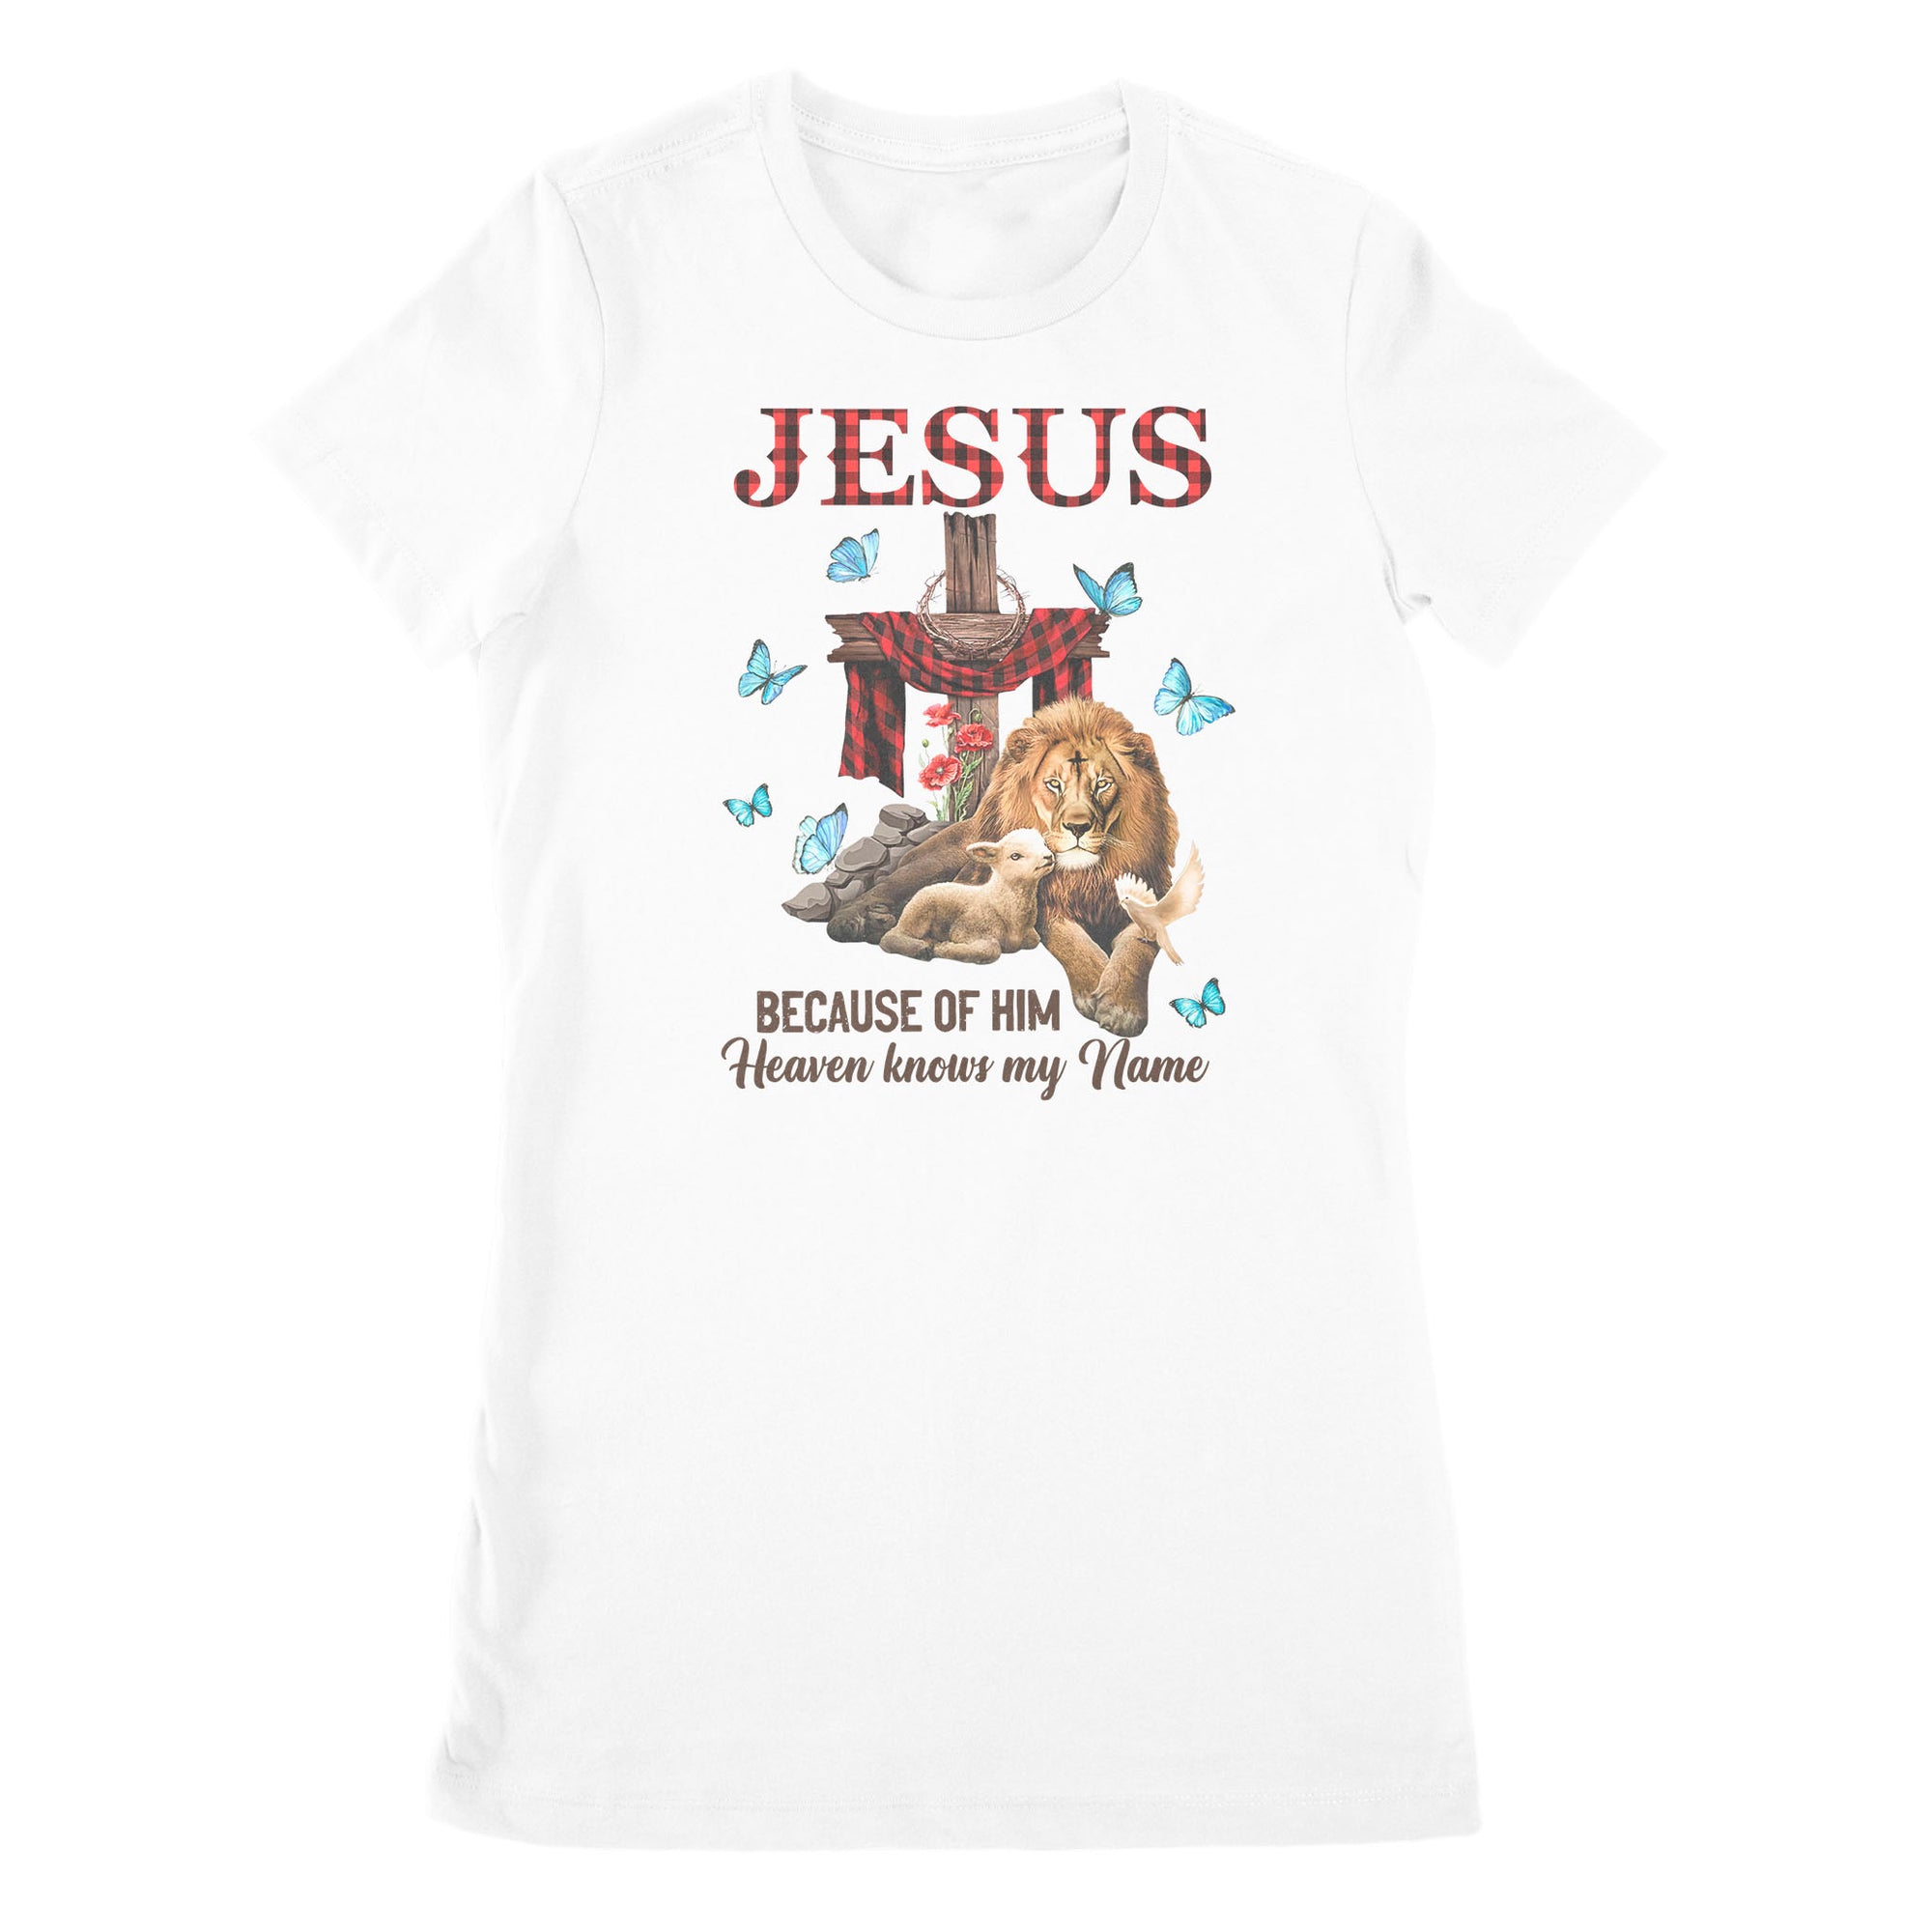 Premium Women's T-shirt - Jesus Because Of Him Heaven Knows My Name